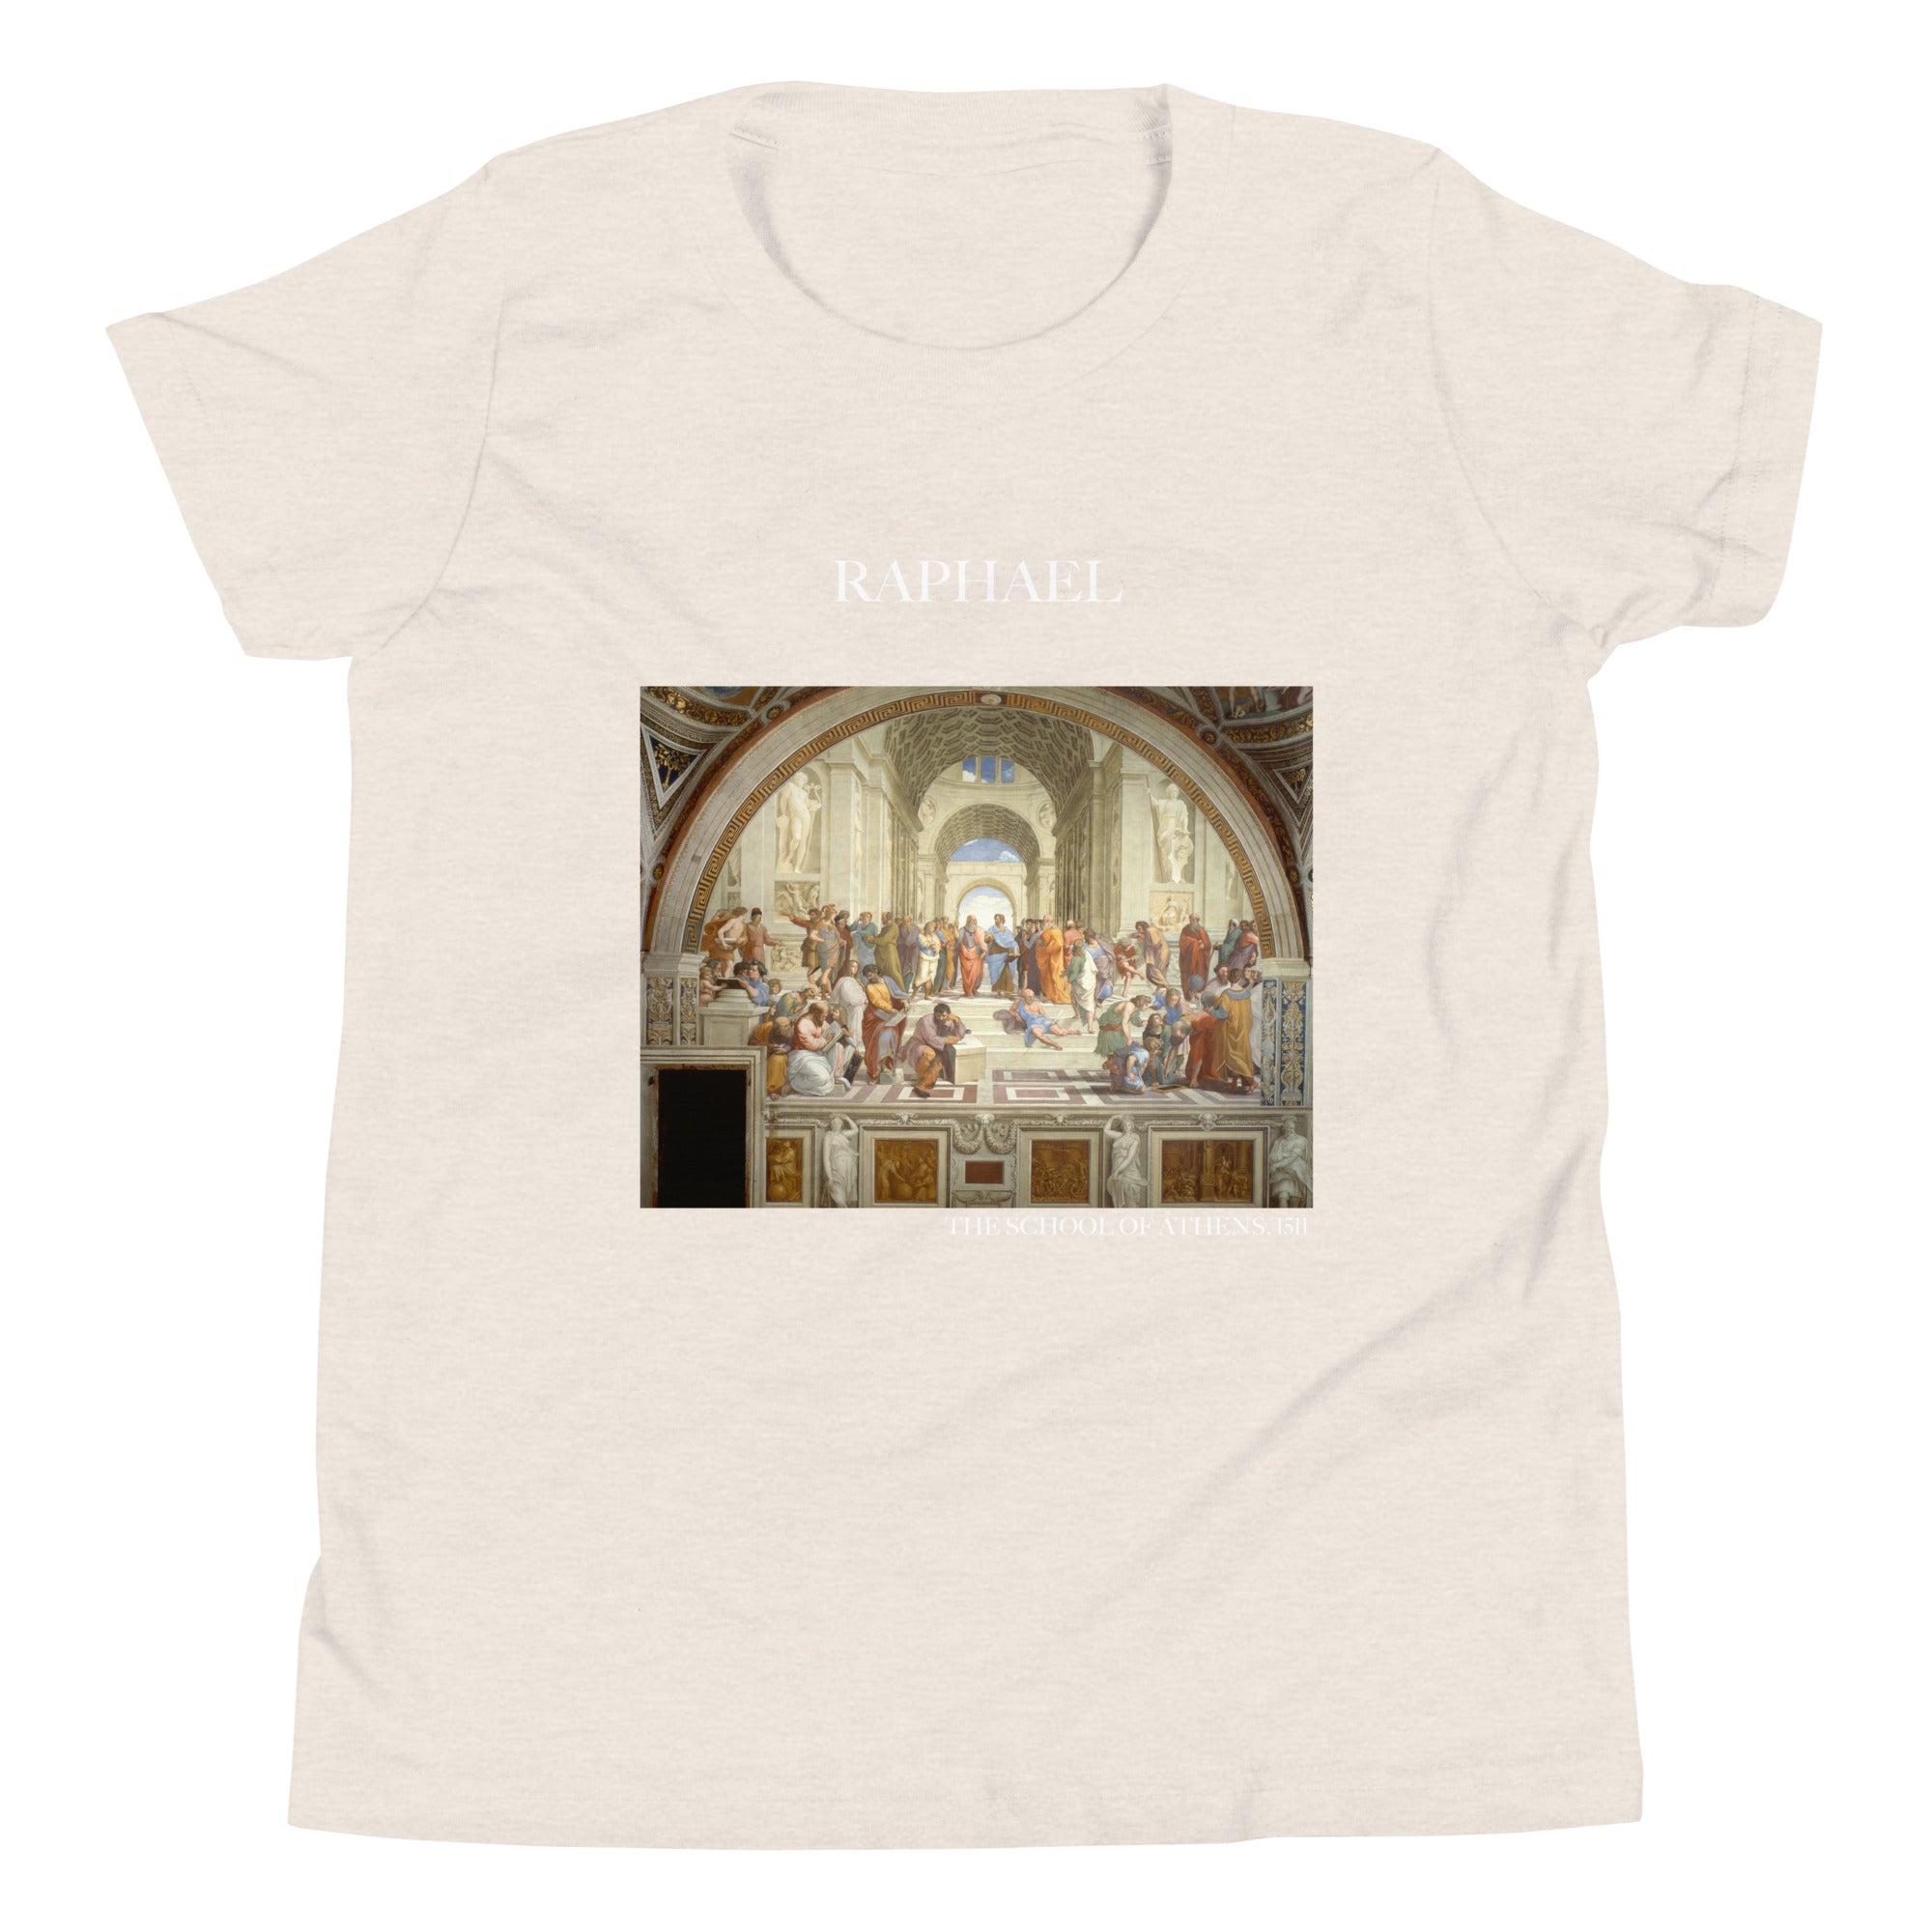 Raphael 'The School of Athens' Famous Painting Short Sleeve T-Shirt | Premium Youth Art Tee